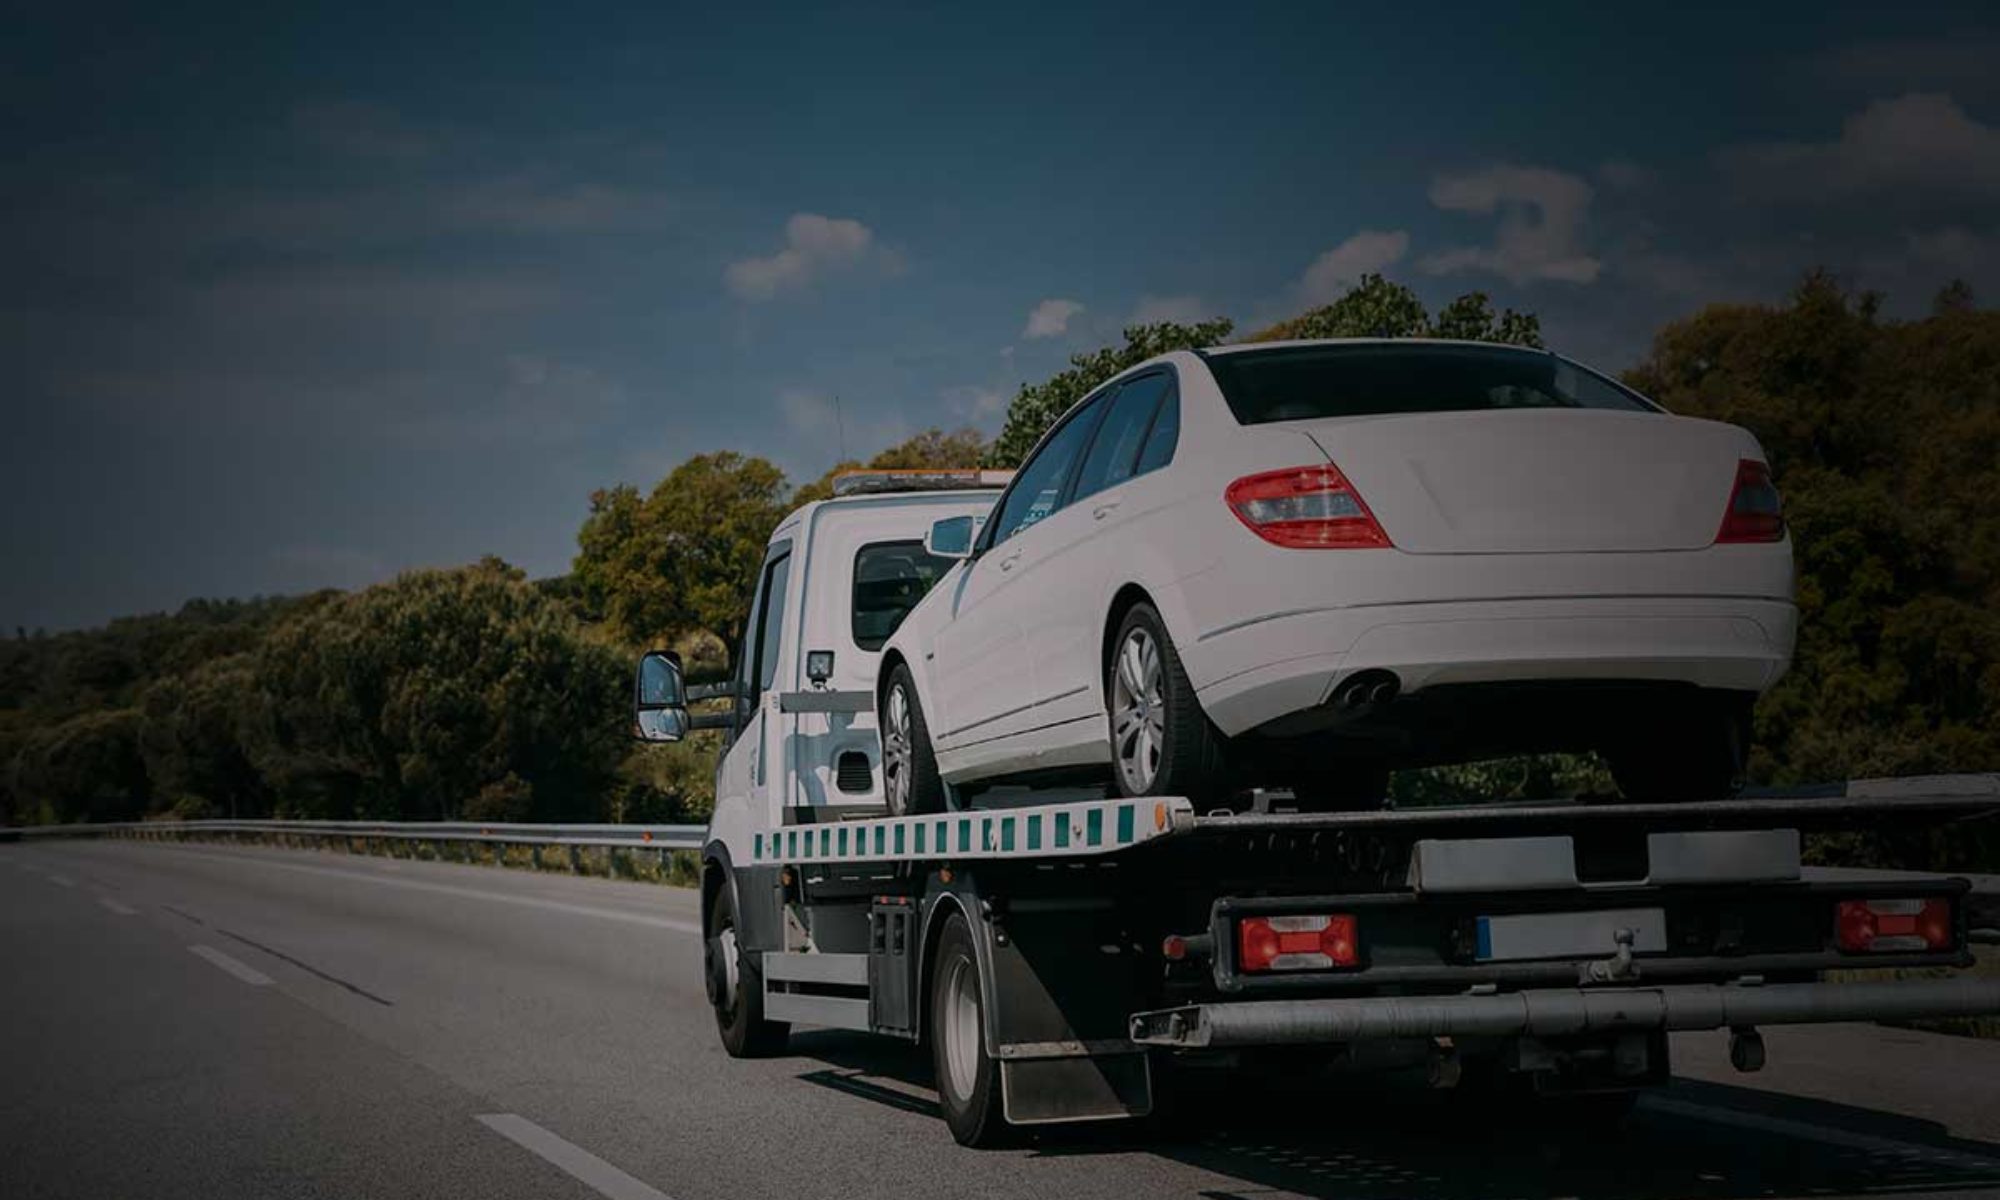 247 Fairfax Towing - CF Towing & Recovery